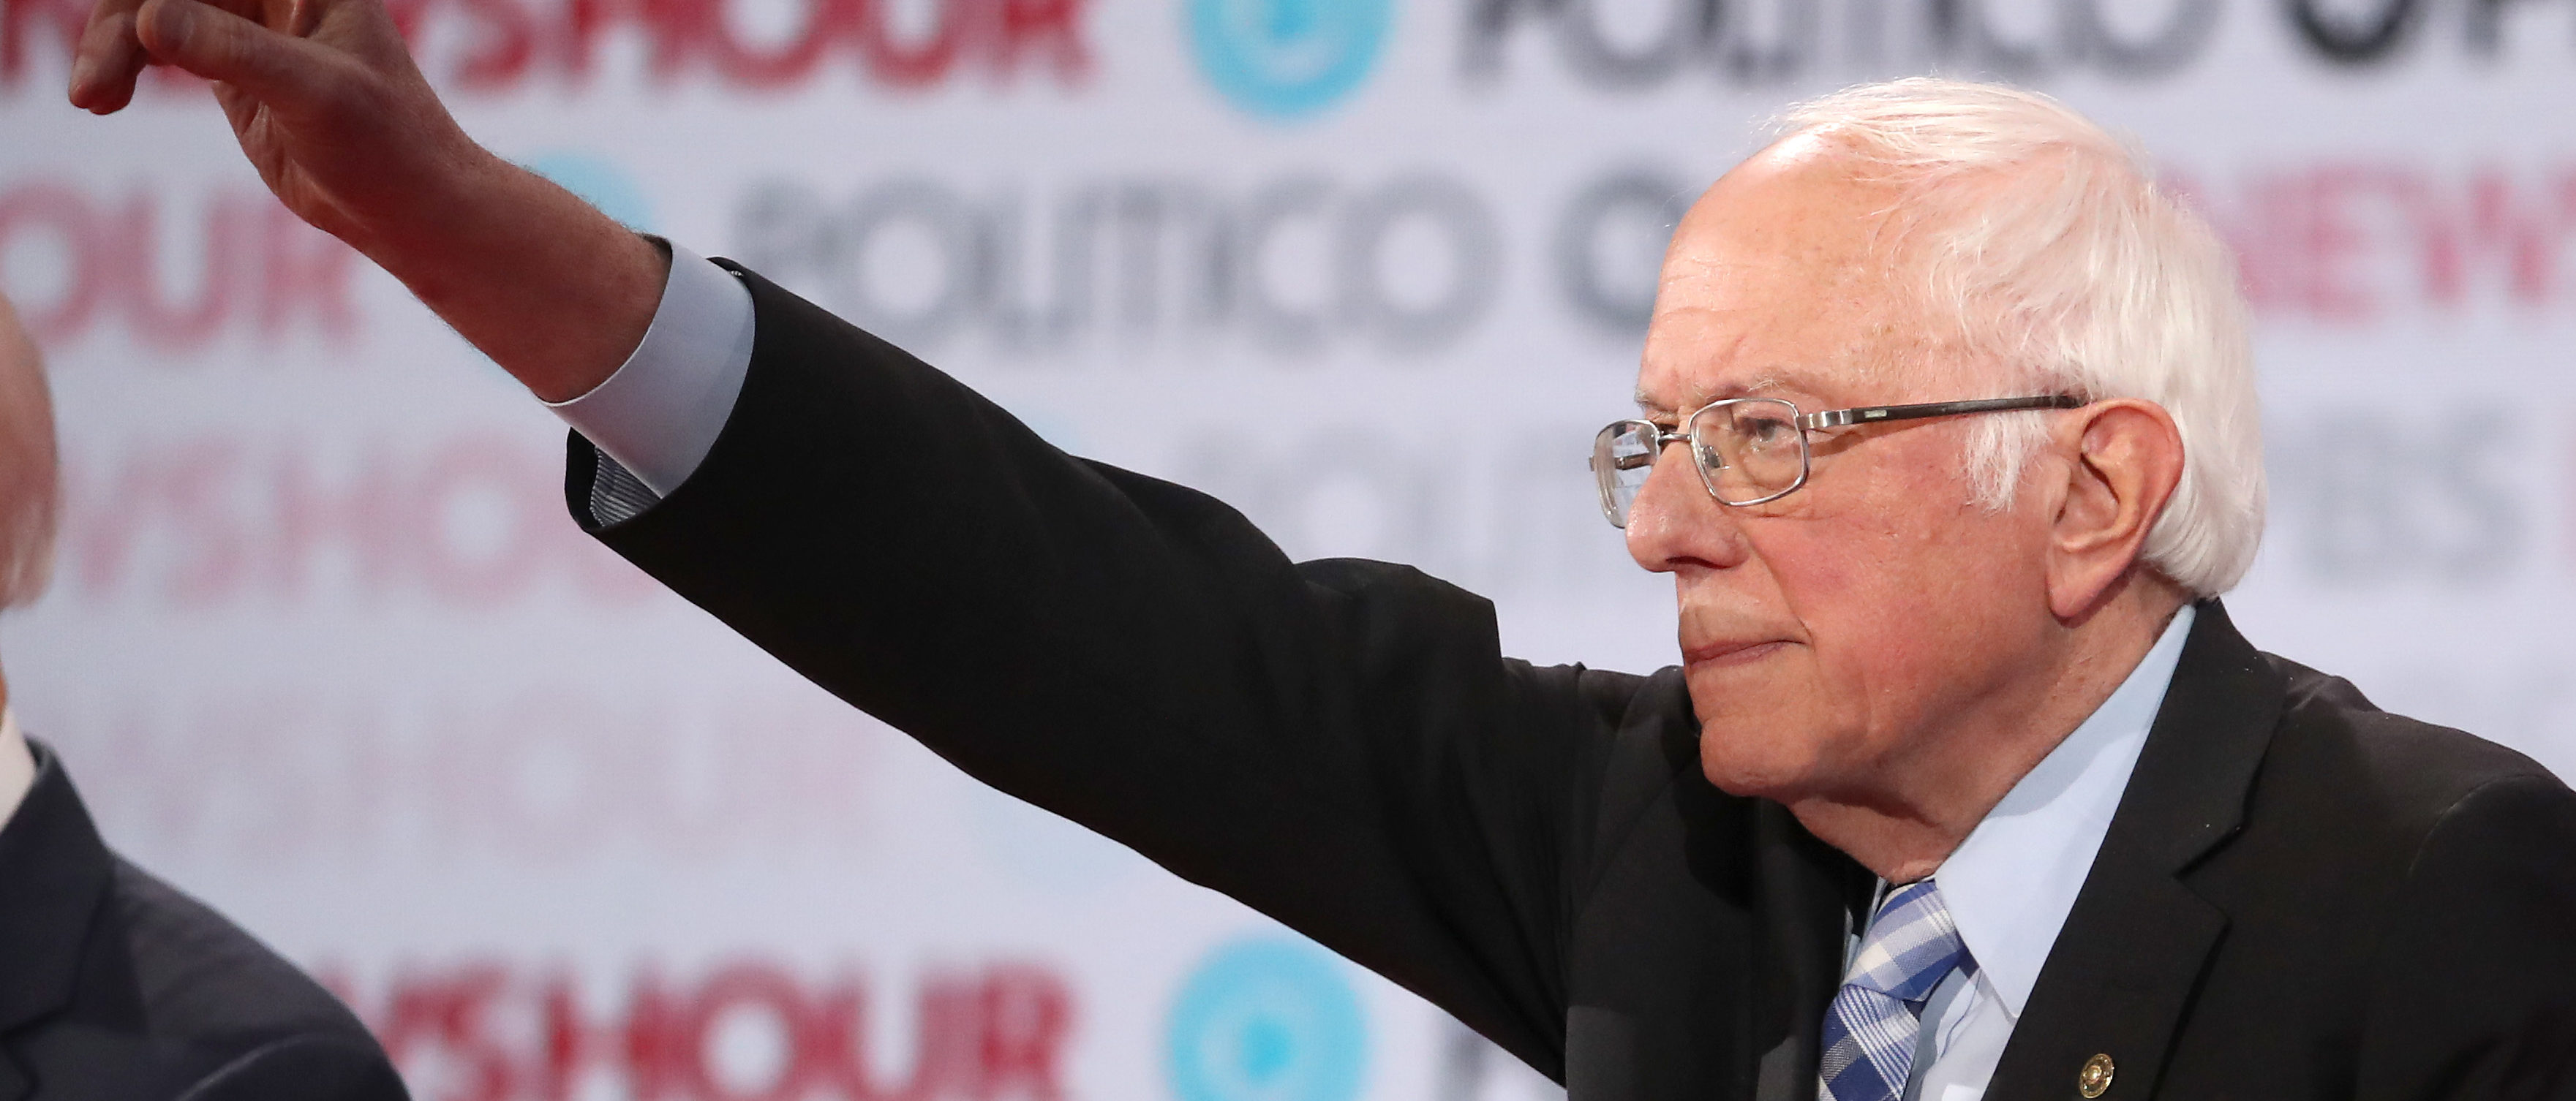 LOS ANGELES, CALIFORNIA - DECEMBER 19: Sen. Bernie Sanders (I-VT) raises his hand during the Democratic presidential primary debate at Loyola Marymount University on December 19, 2019 in Los Angeles, California. Seven candidates out of the crowded field qualified for the 6th and last Democratic presidential primary debate of 2019 hosted by PBS NewsHour and Politico. (Photo by Justin Sullivan/Getty Images)